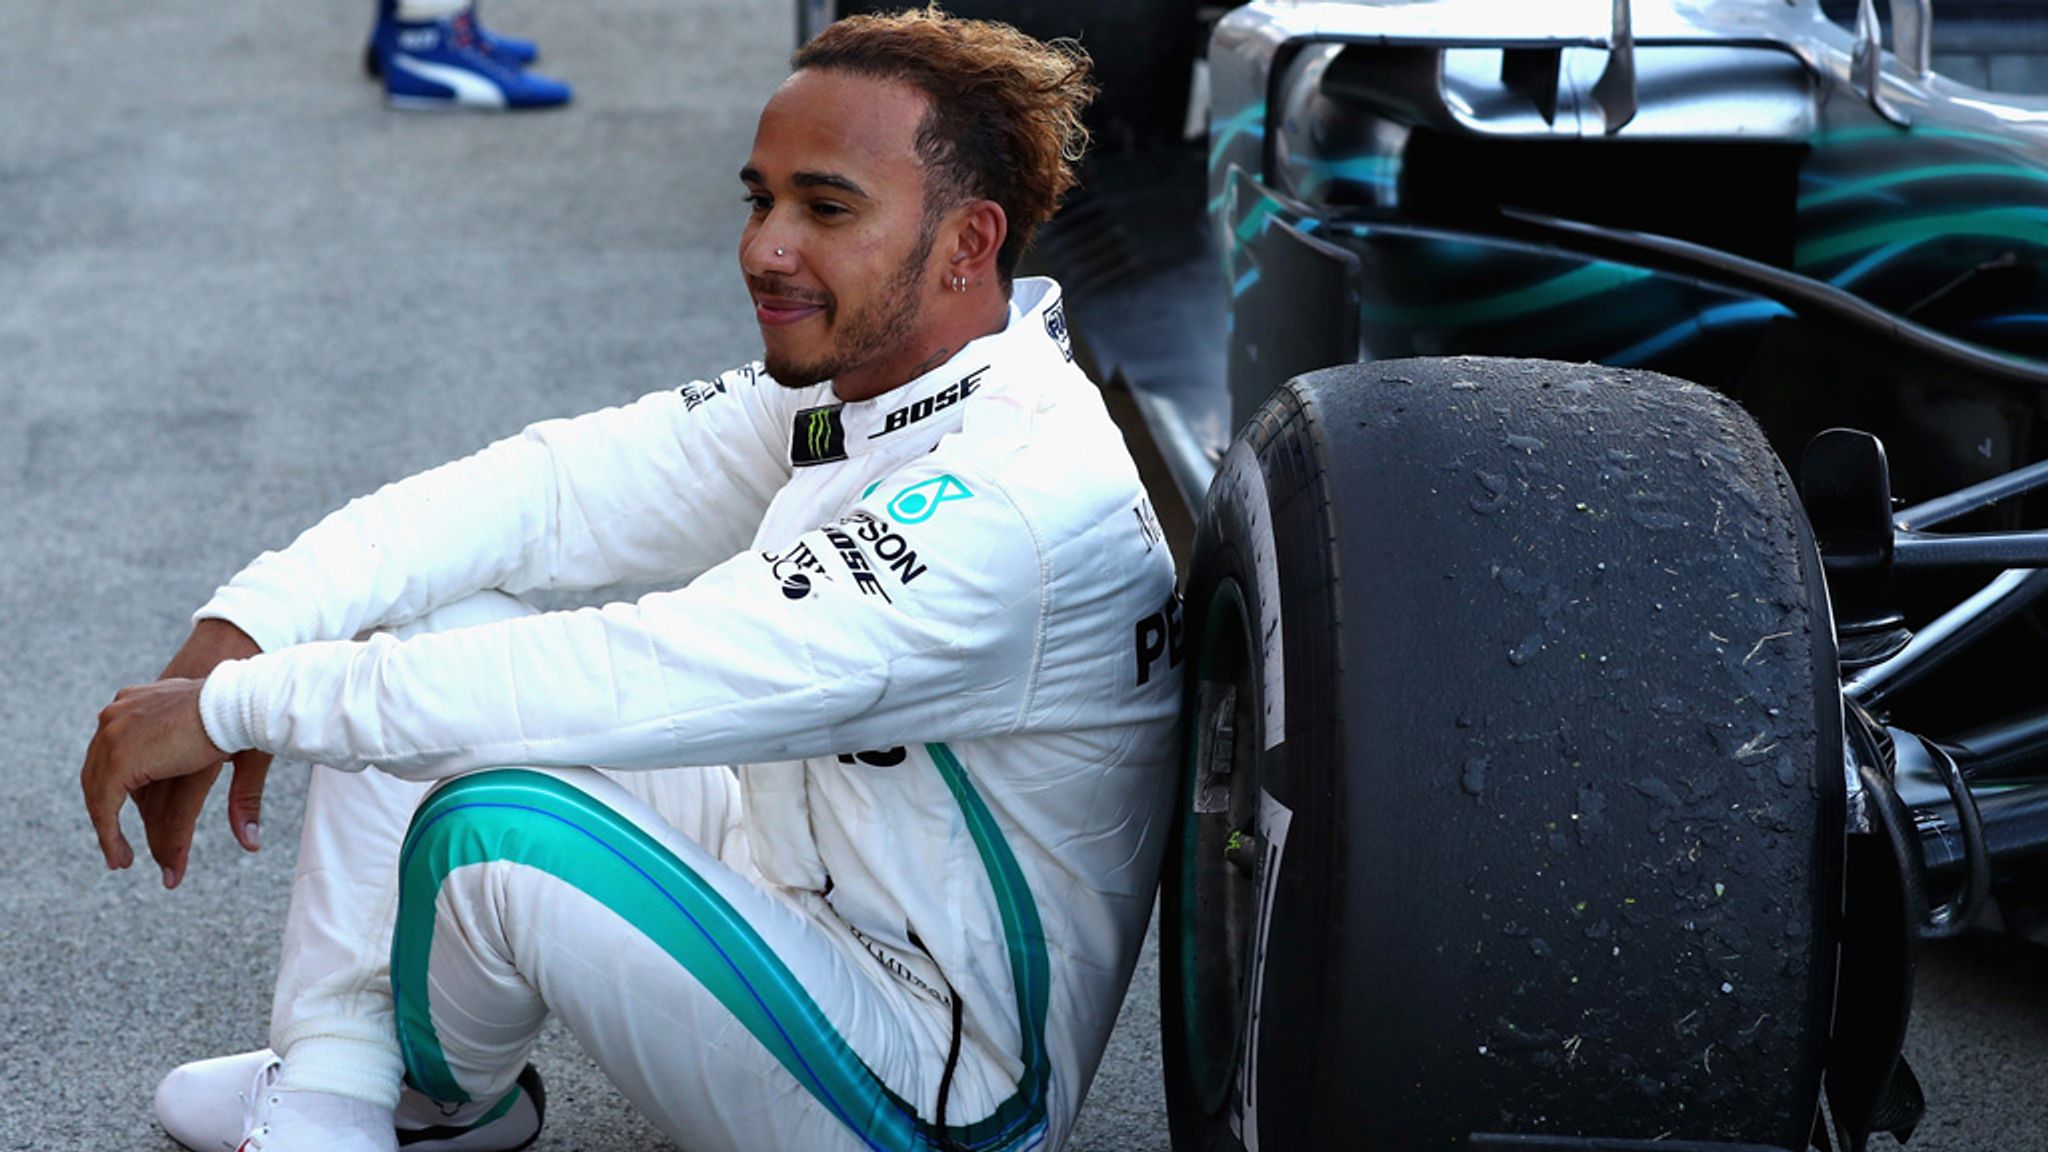 Hamilton clinches sixth title as Bottas wins the 2019 F1 United States  Grand Prix — race results